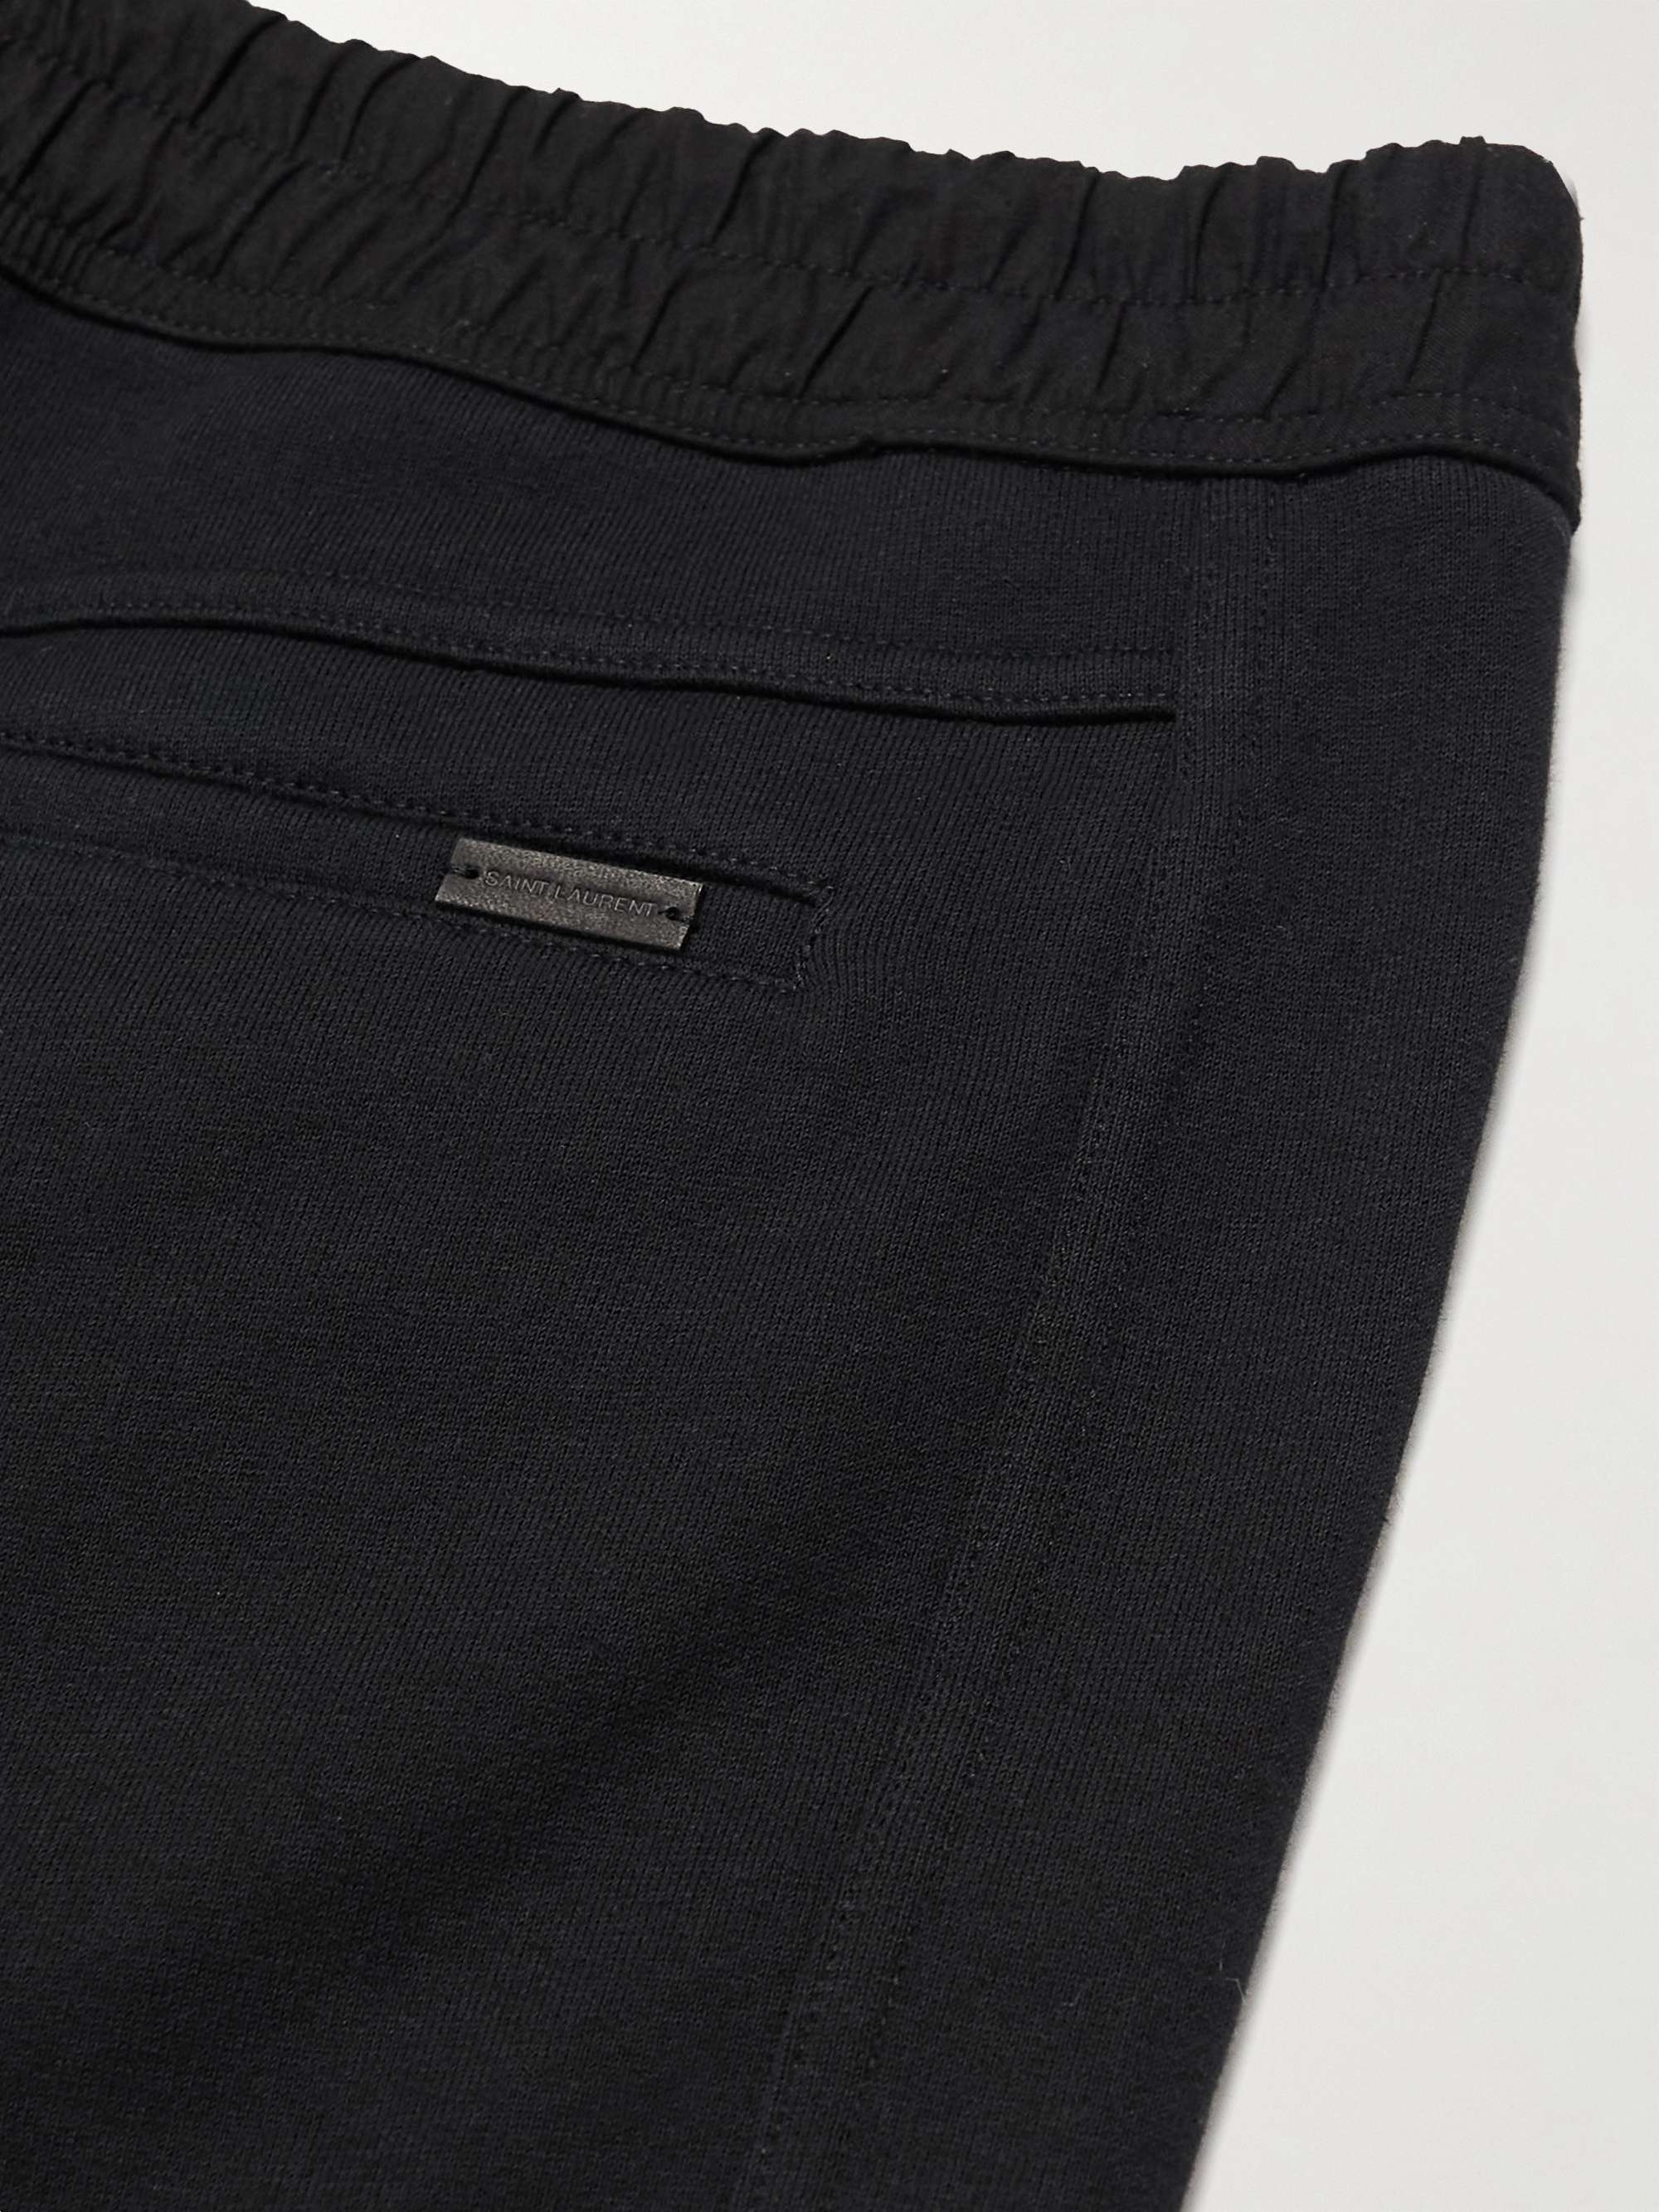 SAINT LAURENT Tapered Logo-Embroidered Cotton-Jersey Sweatpants